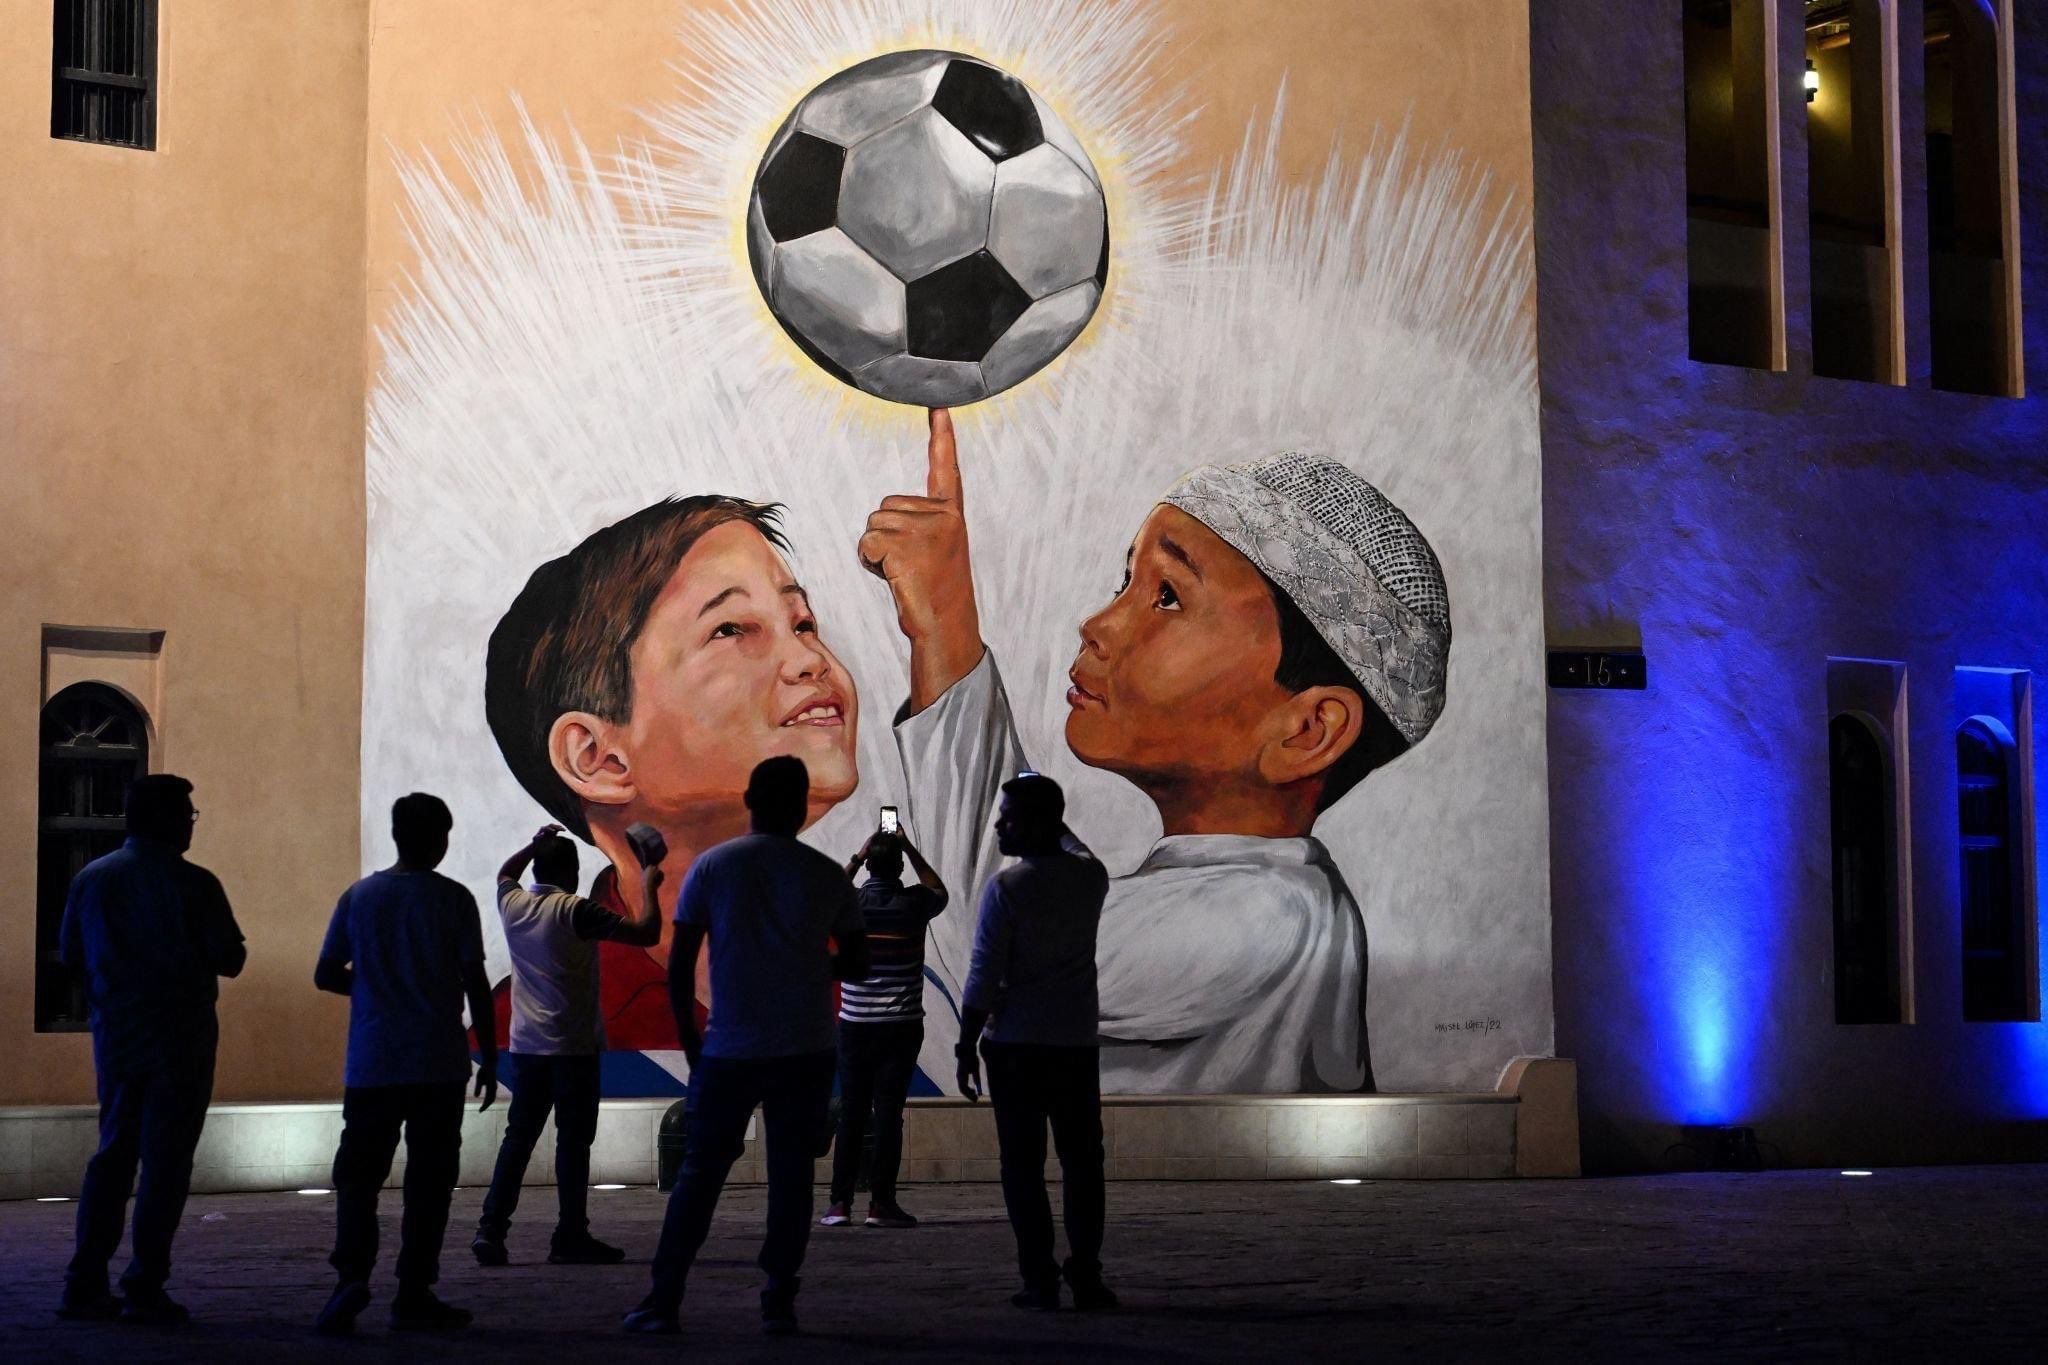 Qatar World Cup: FIFA asks footballers to focus on game not politics